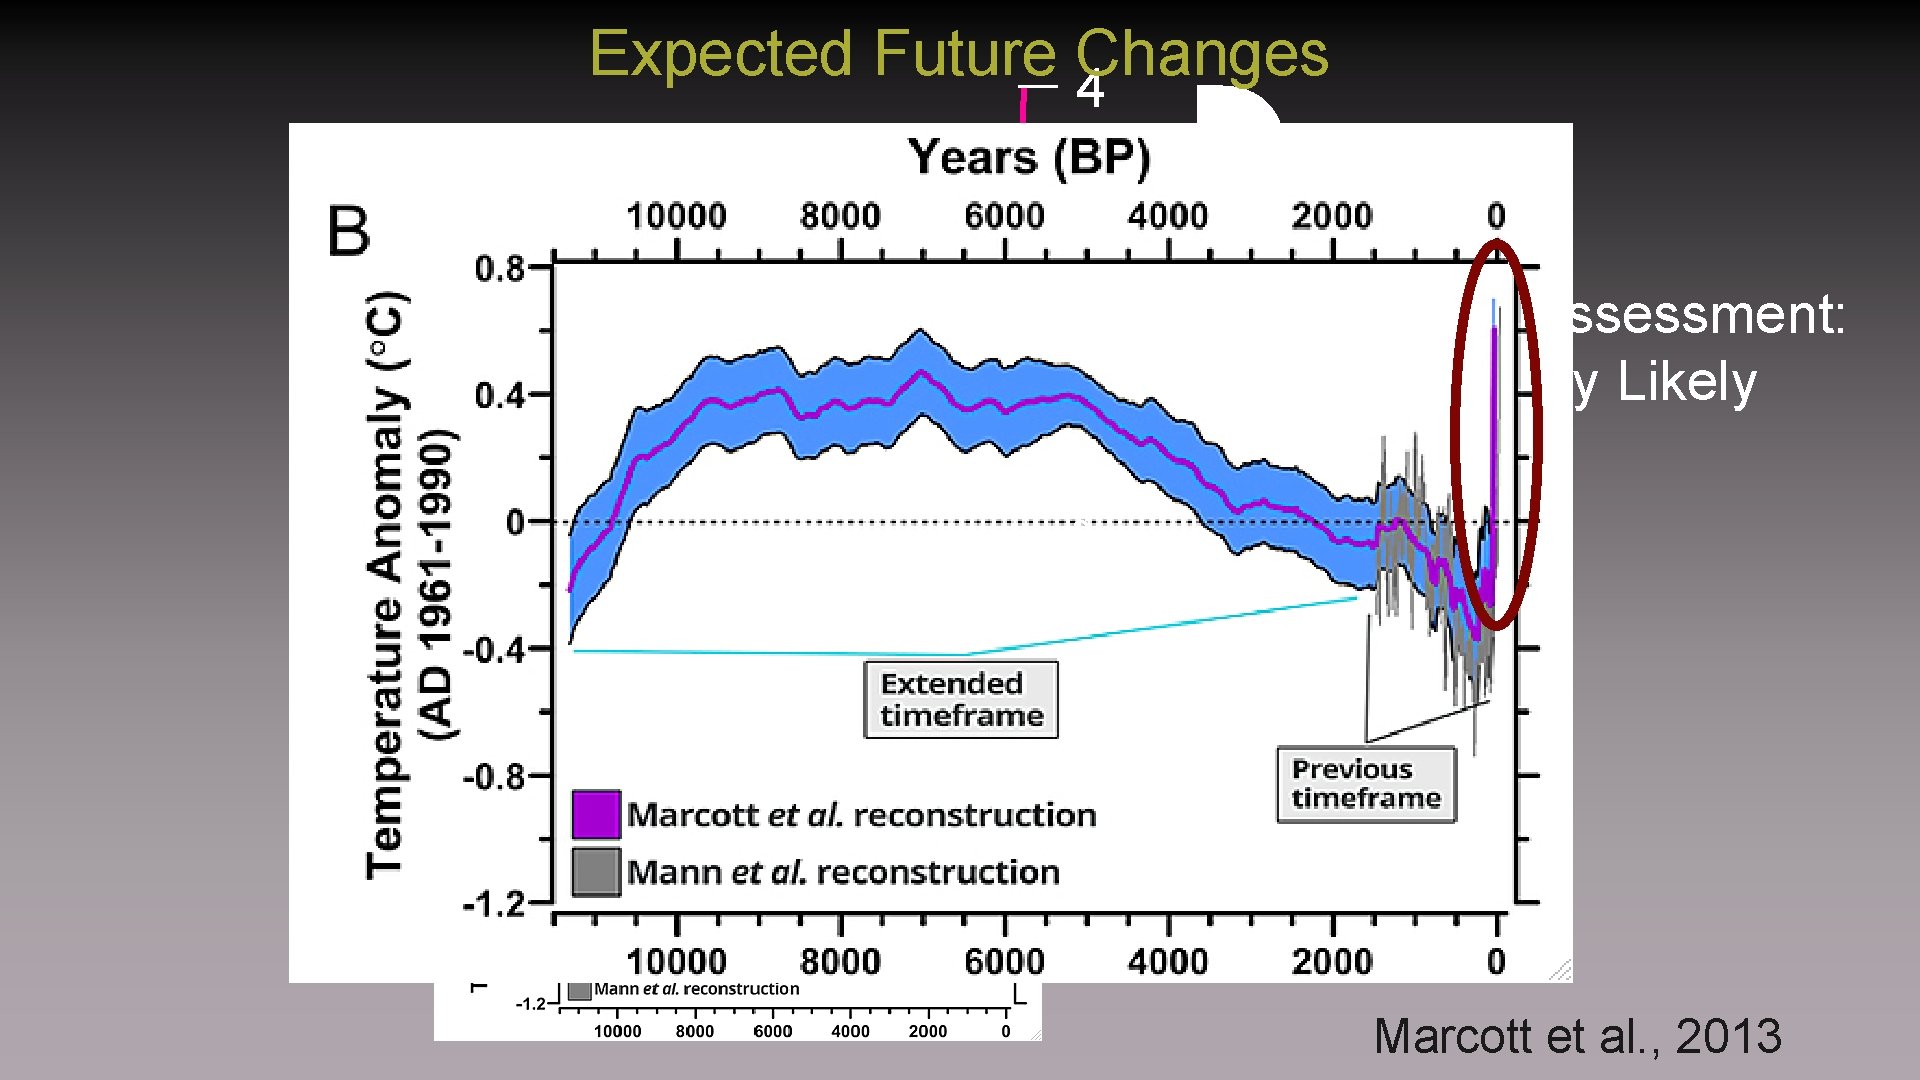 } Expected Future Changes 4 3 2 o 1 C IPCC Assessment: Very Likely